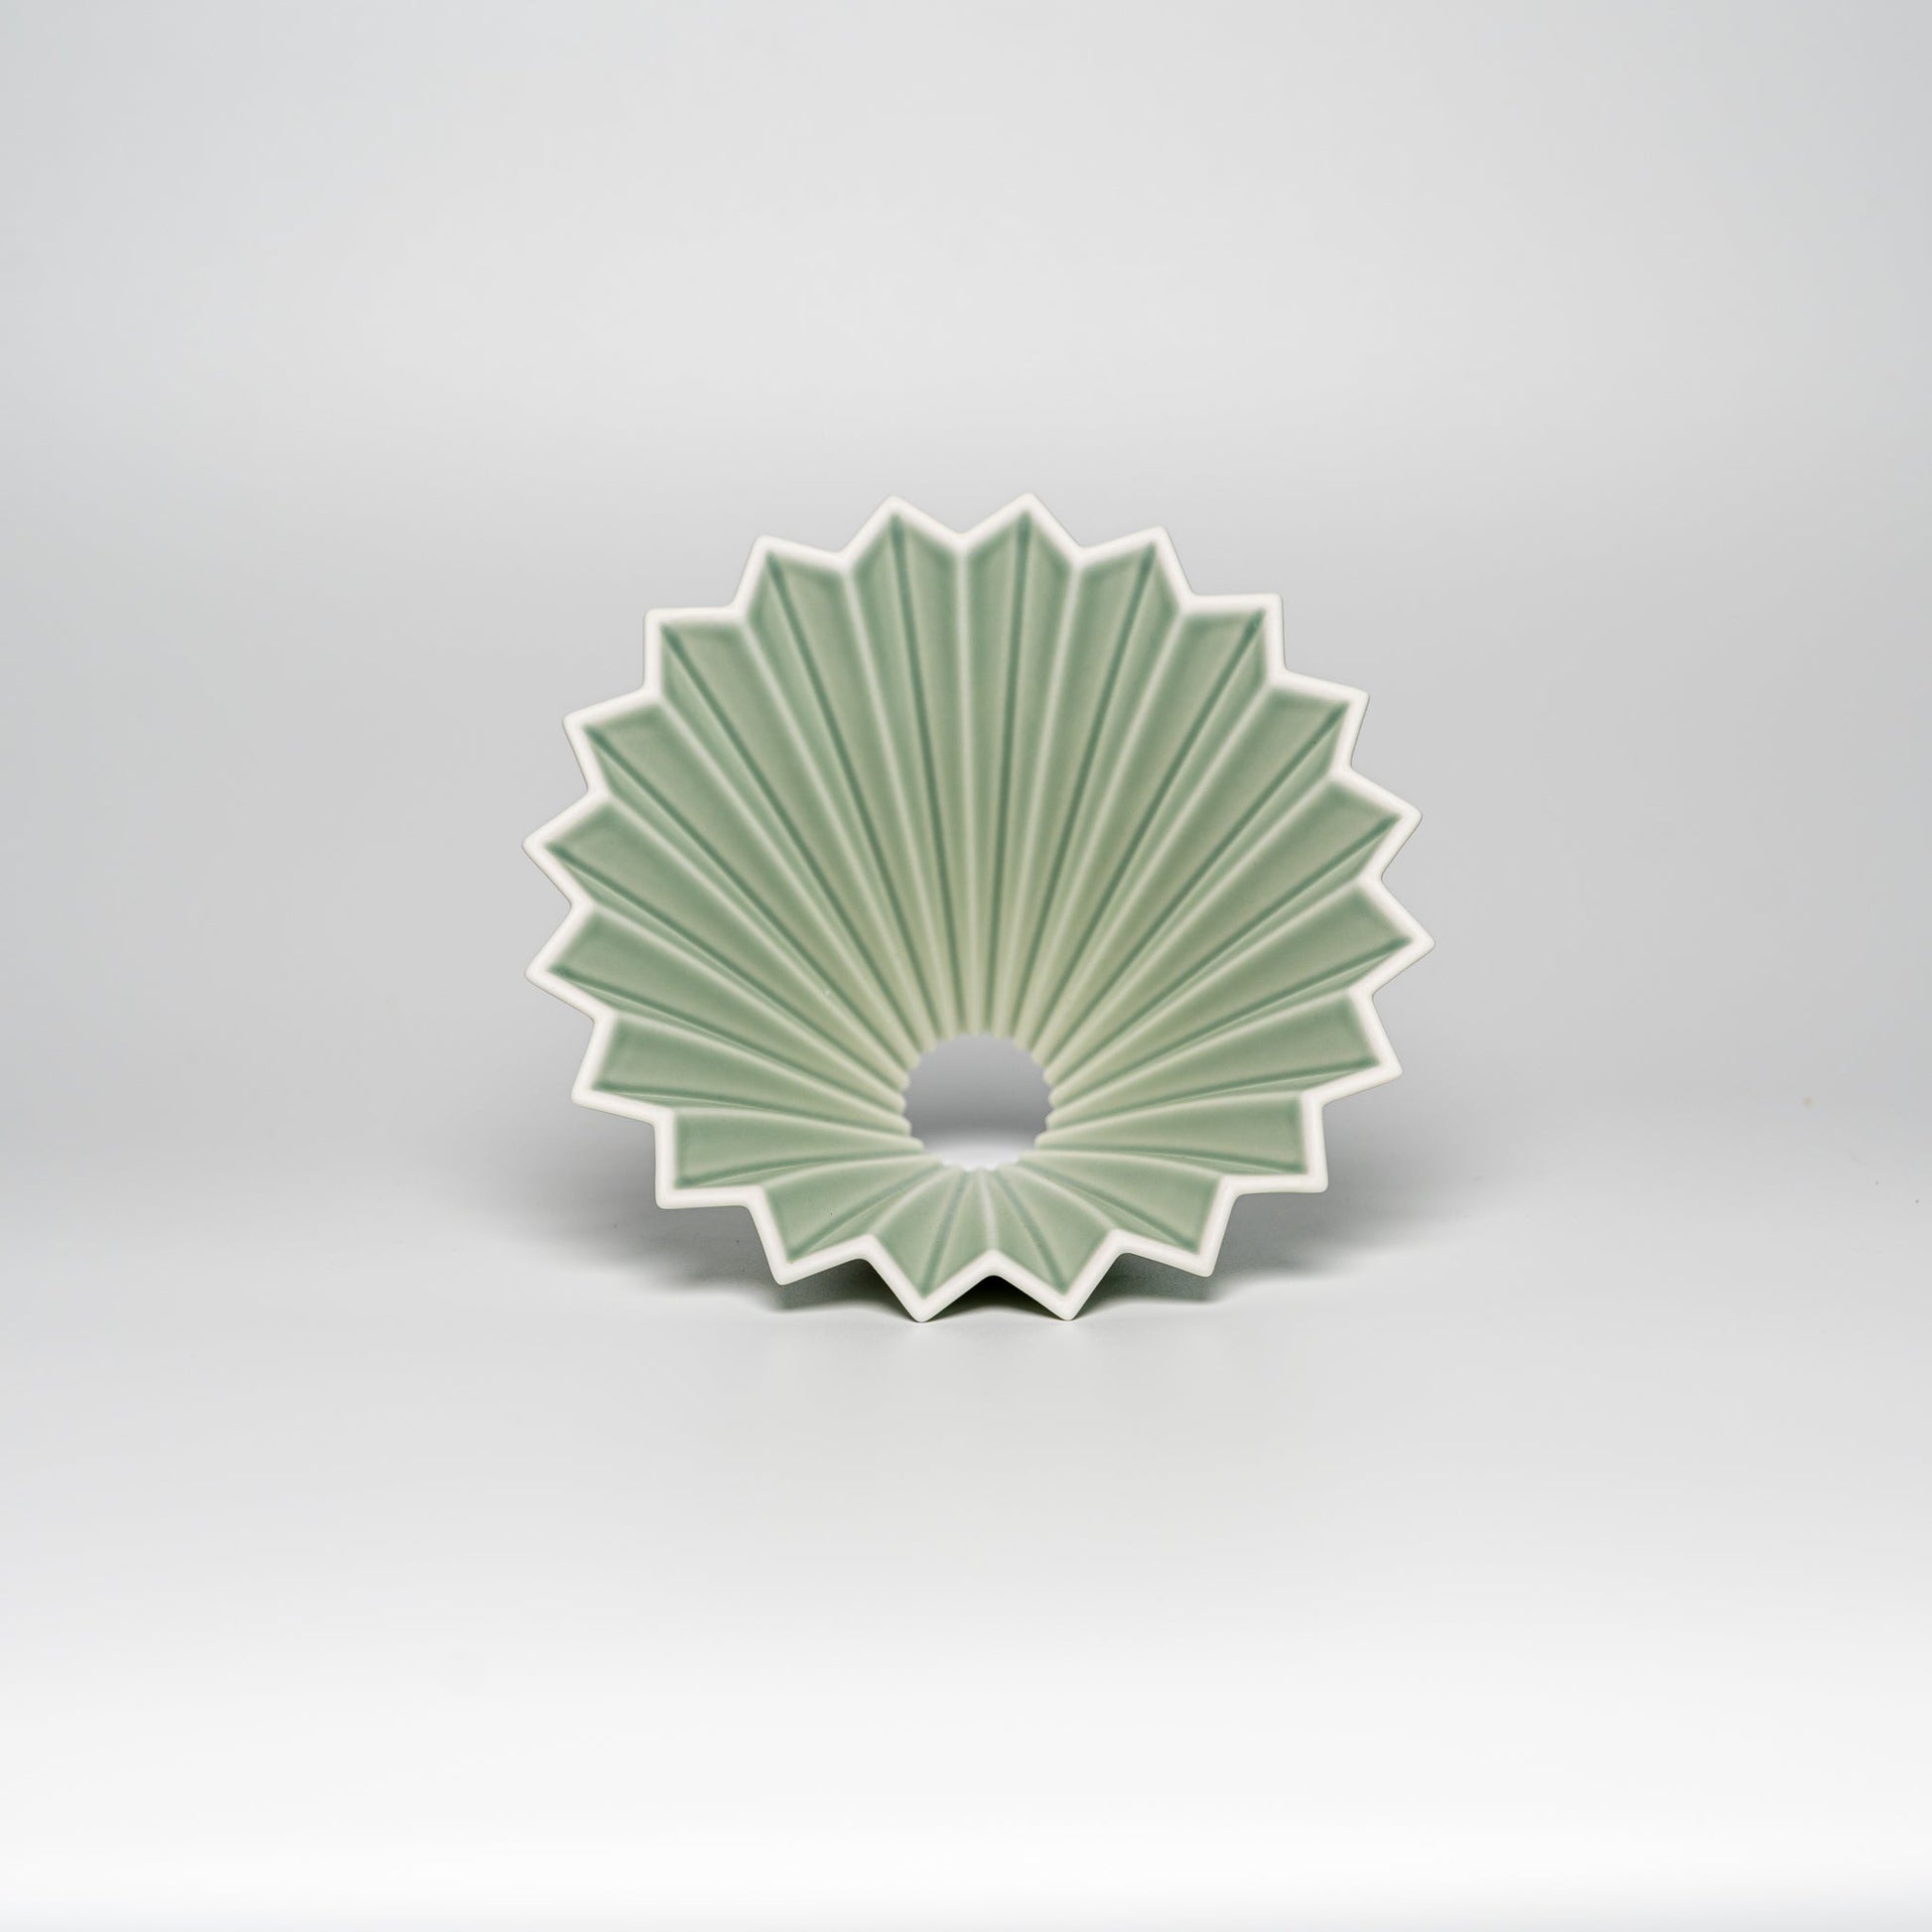 A matte green ORIGAMI coffee dripper on a white background